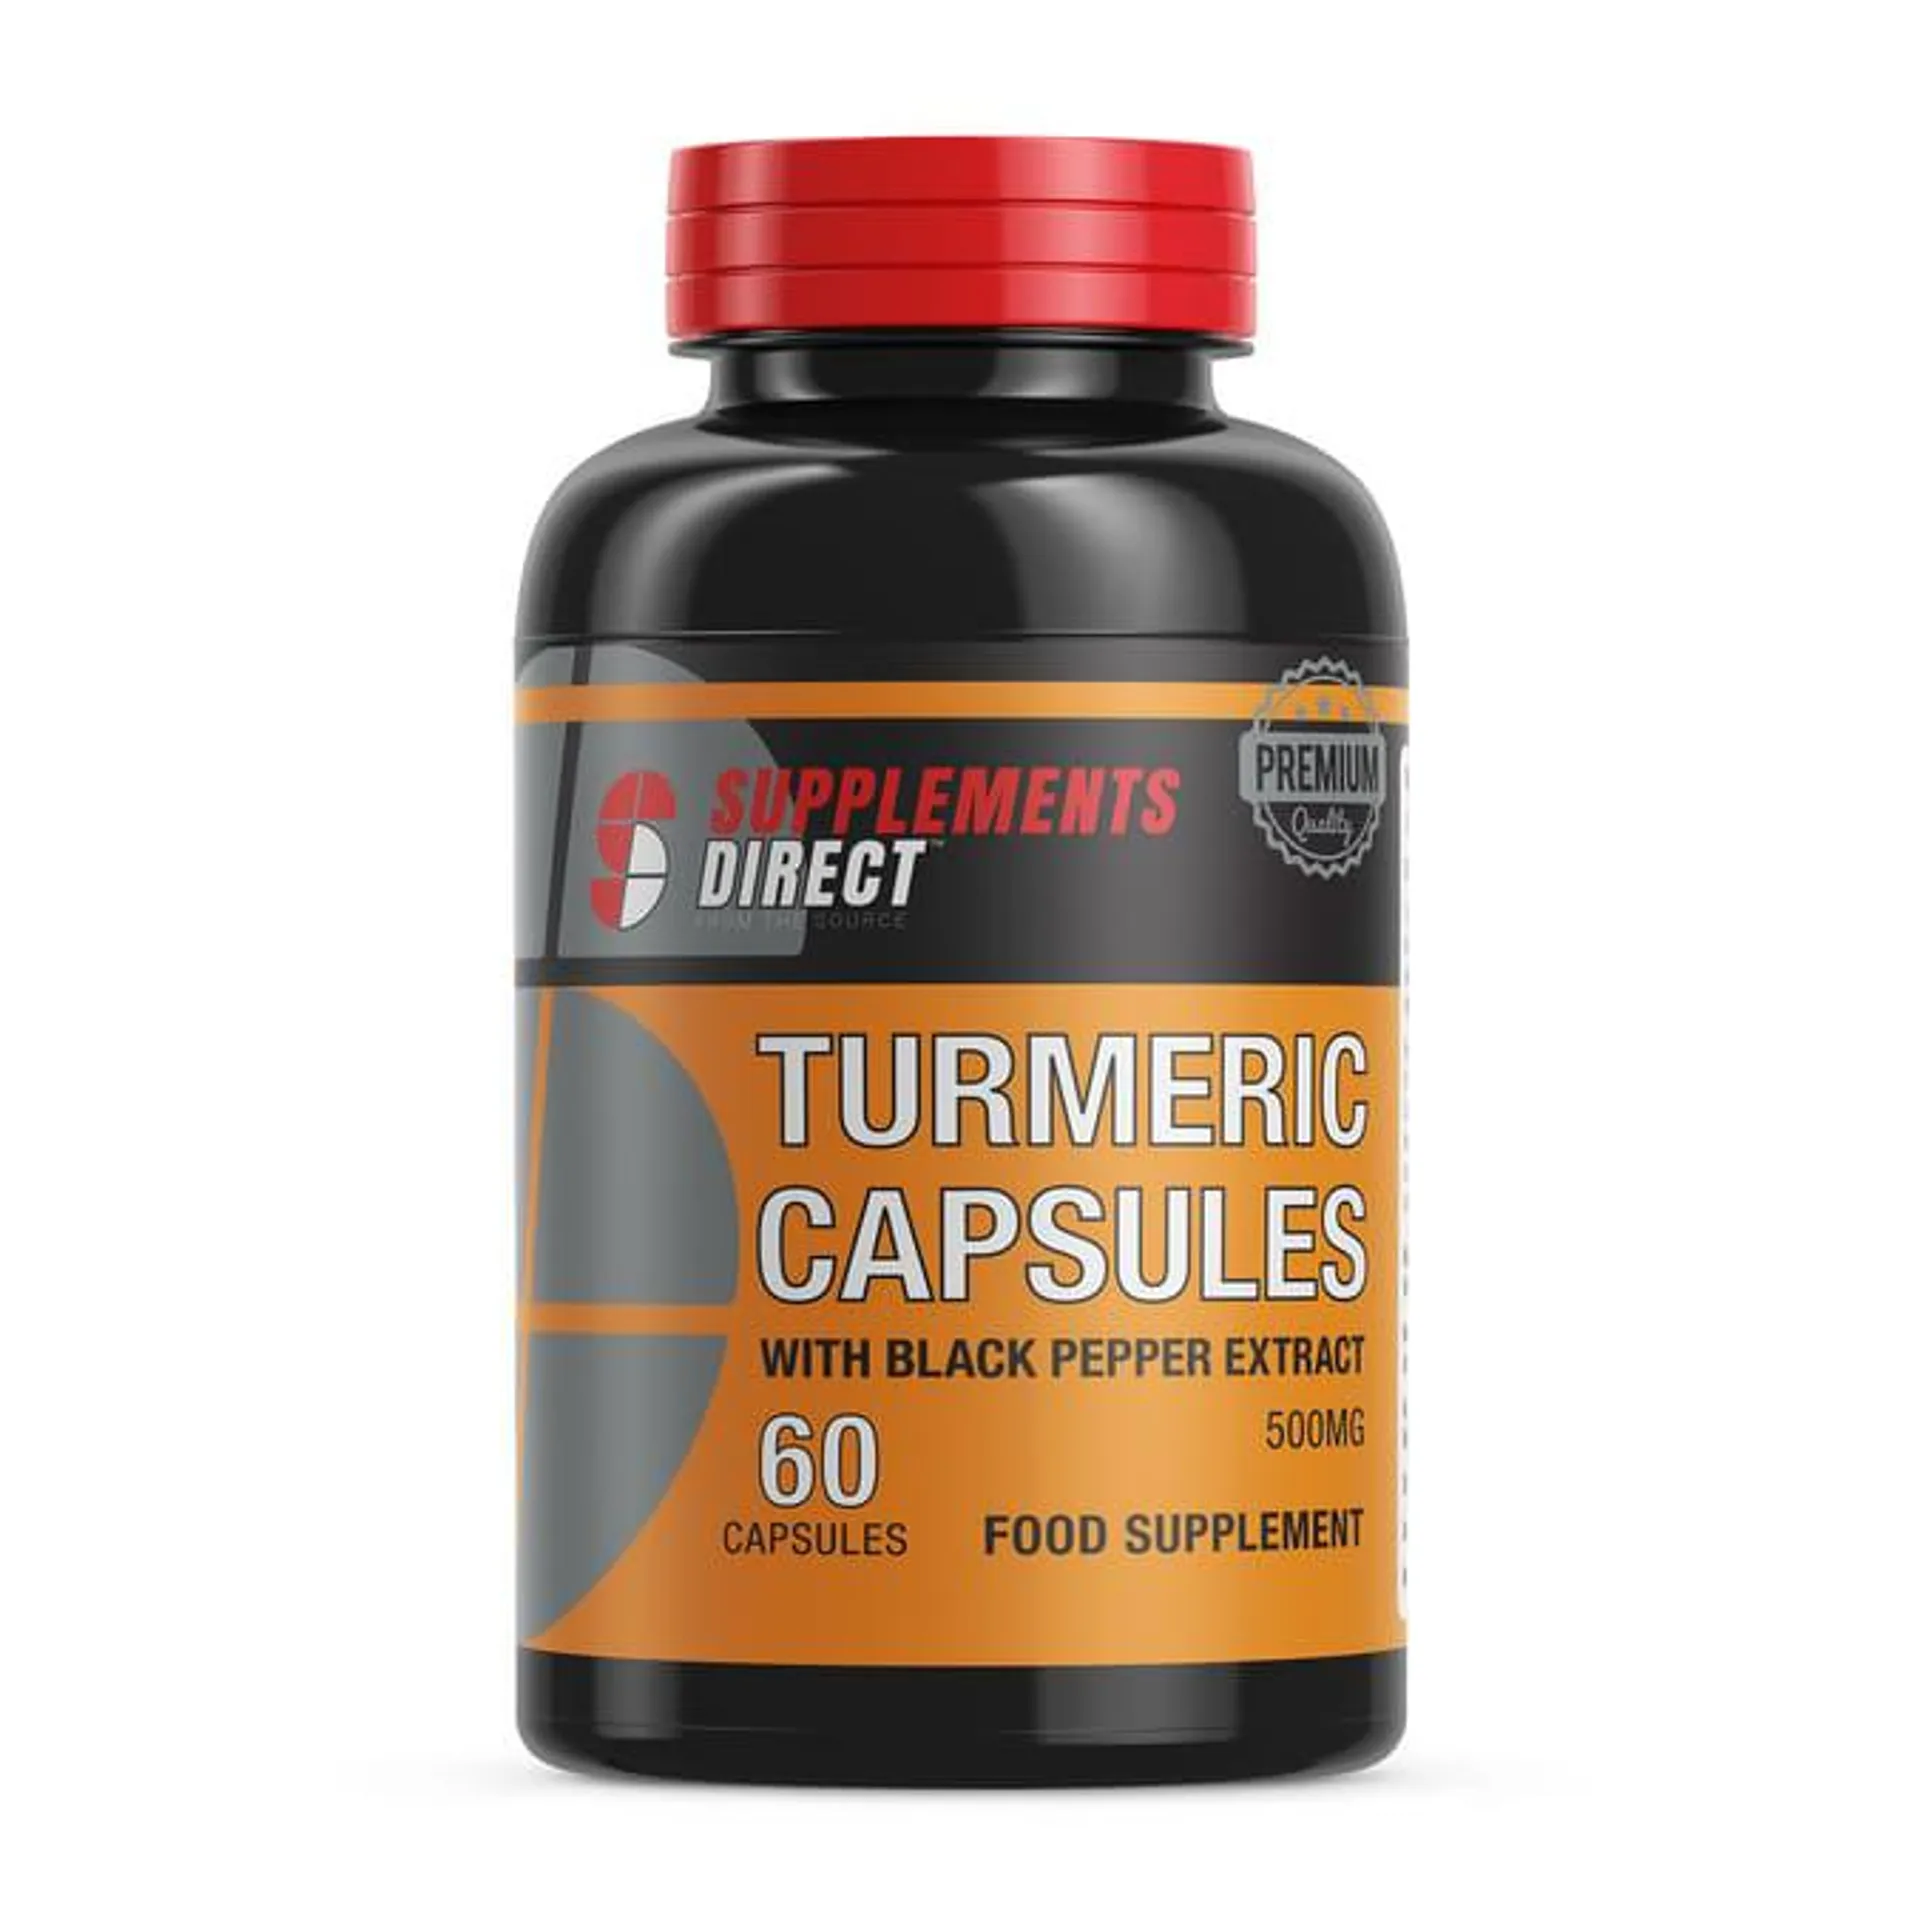 Supplements Direct Turmeric Capsules with Black Pepper Extract Capsules 60s